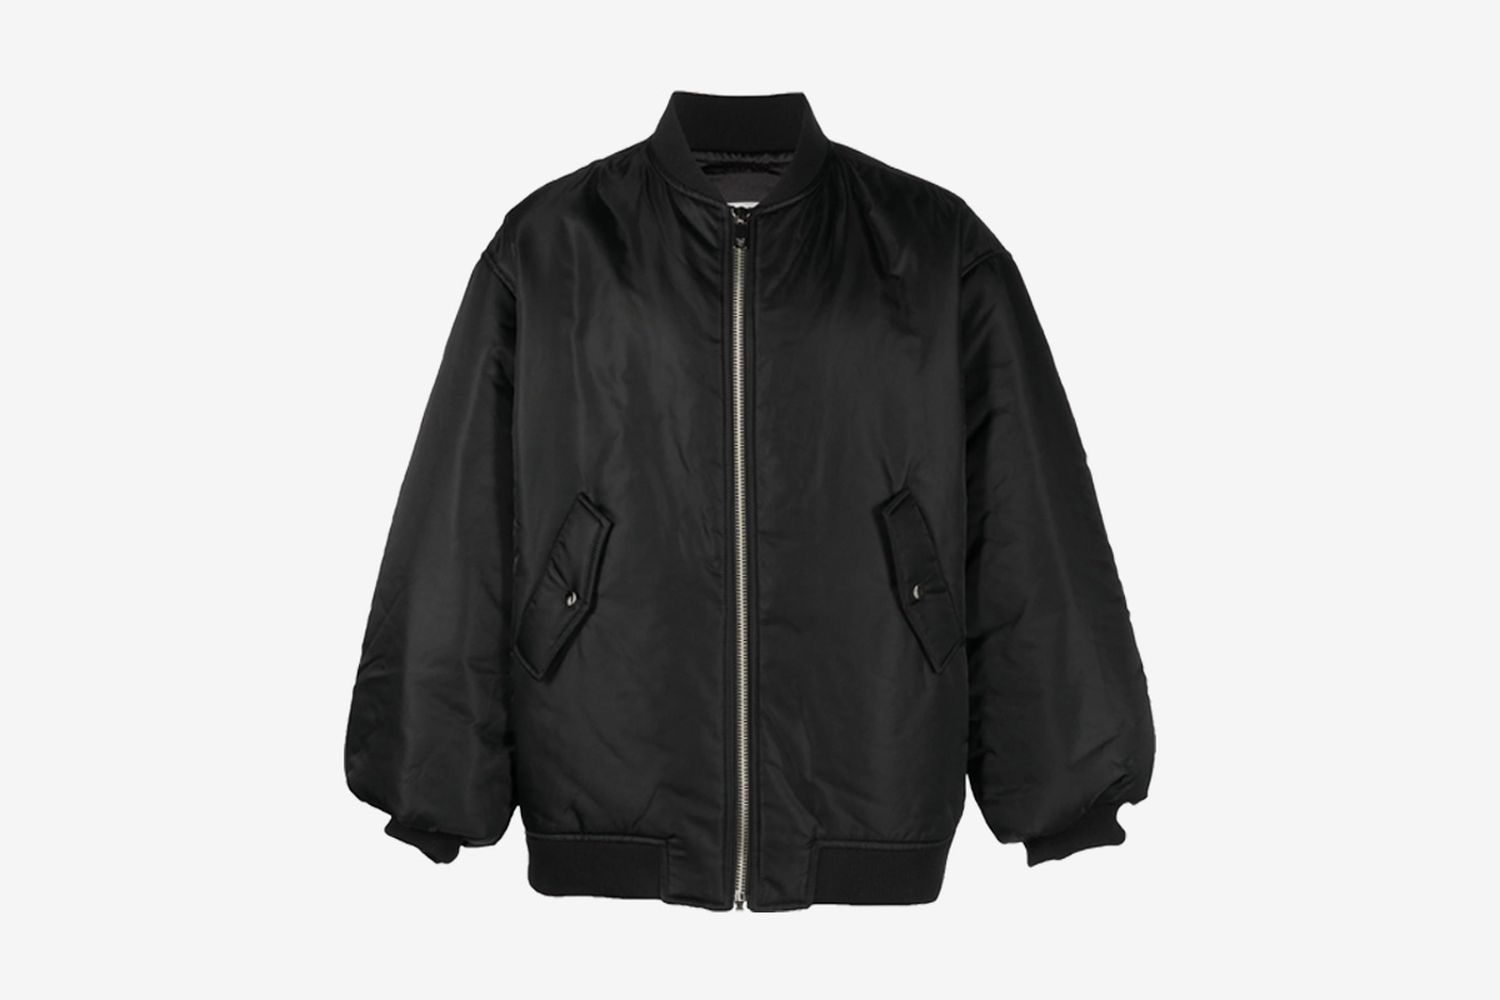 Bomber Jackets: 10 of the Best to Buy in 2023